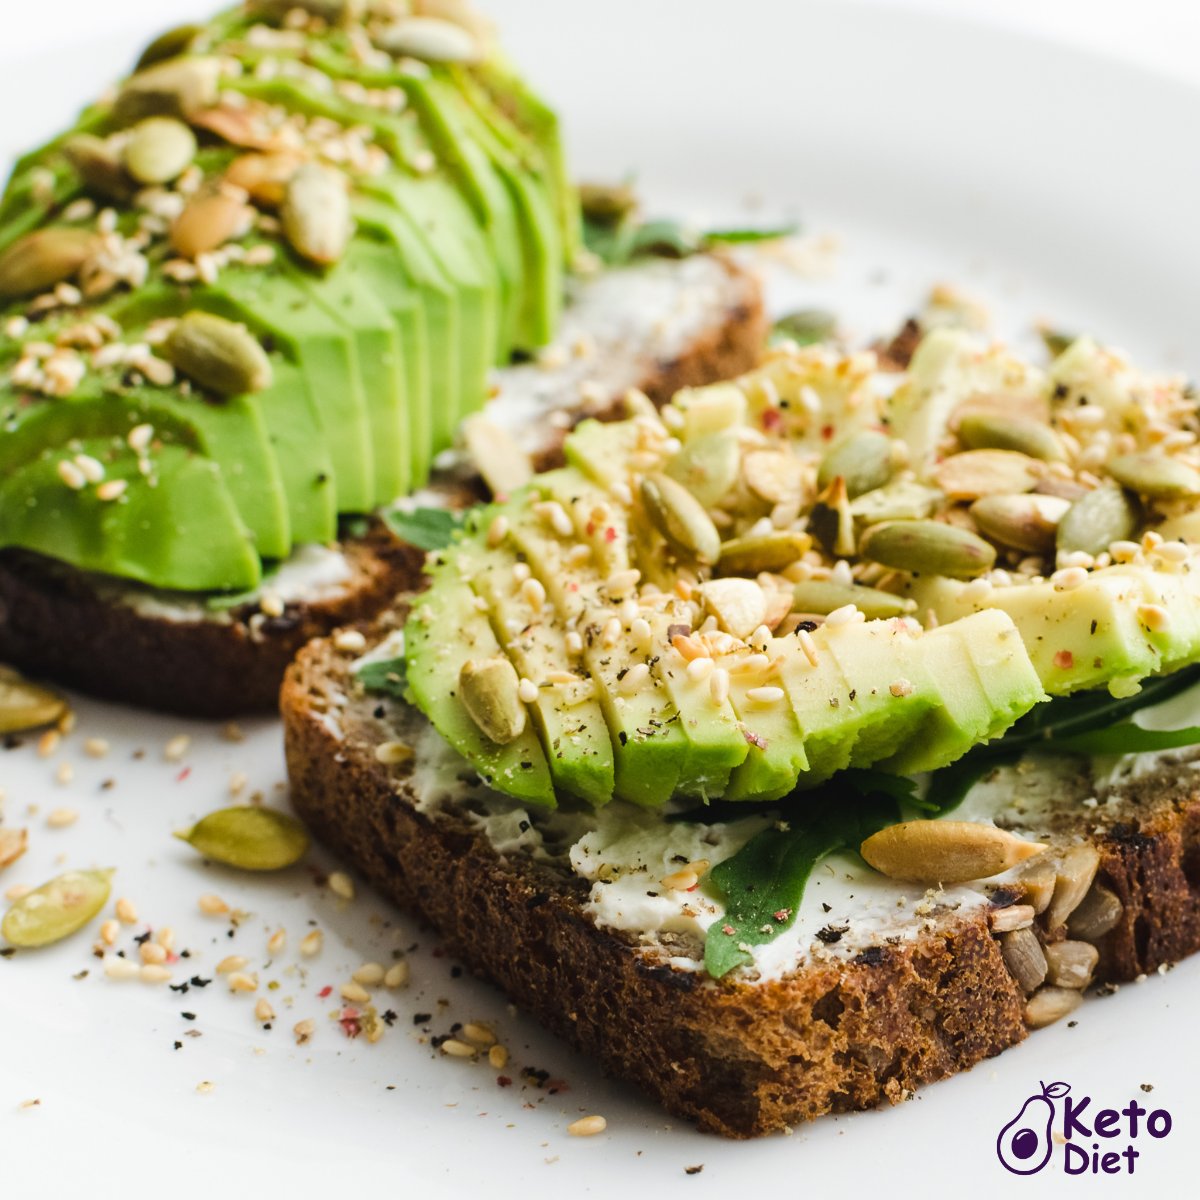 Low-carb toast with cream cheese and avocado topped with seeds 😋😍